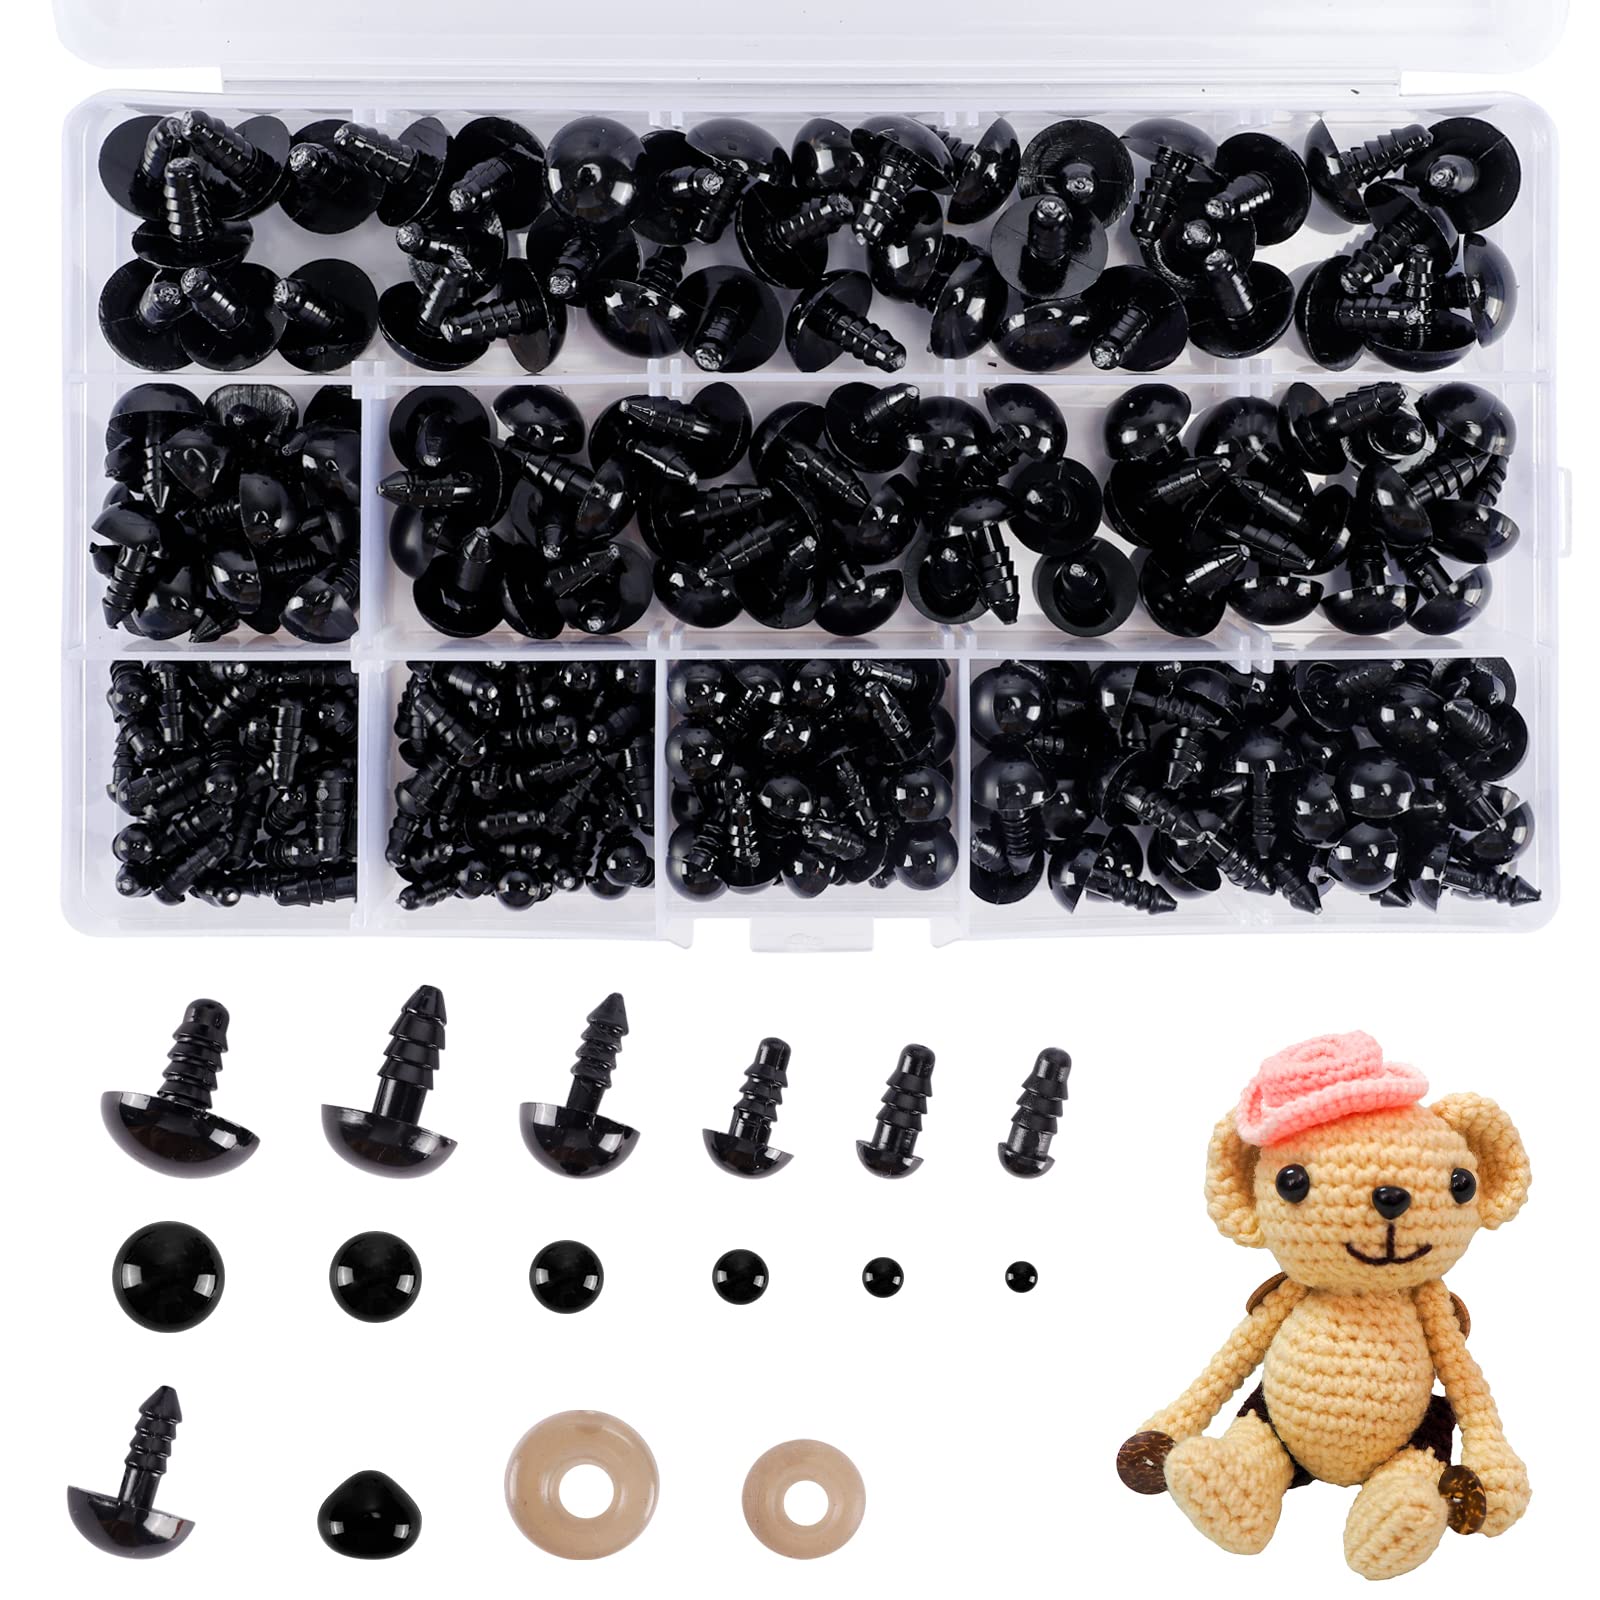 TOAOB Pack of 50 Safety Eyes, 8 mm, Black, Plastic, Crafts, Dolls, Eyes,  Button Eyes with Washers for Crochet Animals, Doll, Puppet, Plush Toy,  Teddy